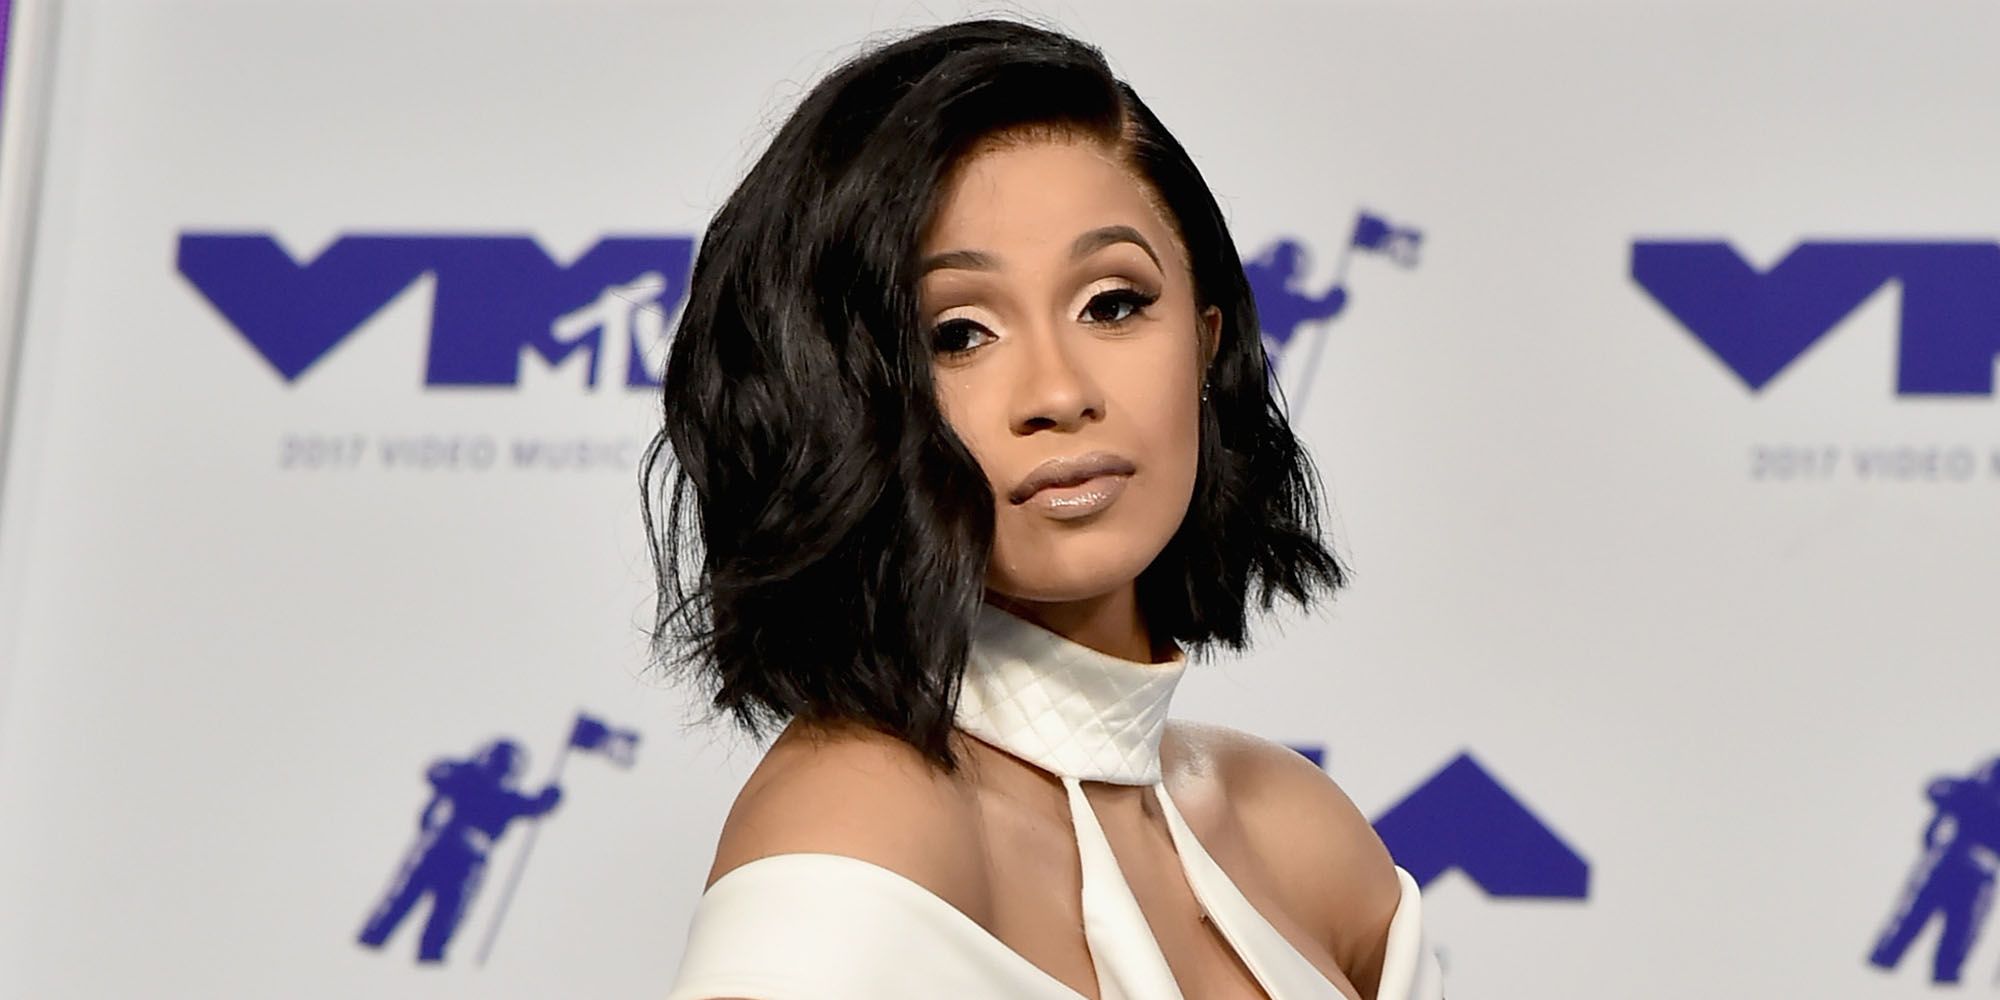 Cardi B just stepped out with a new chocolate mullet haircut